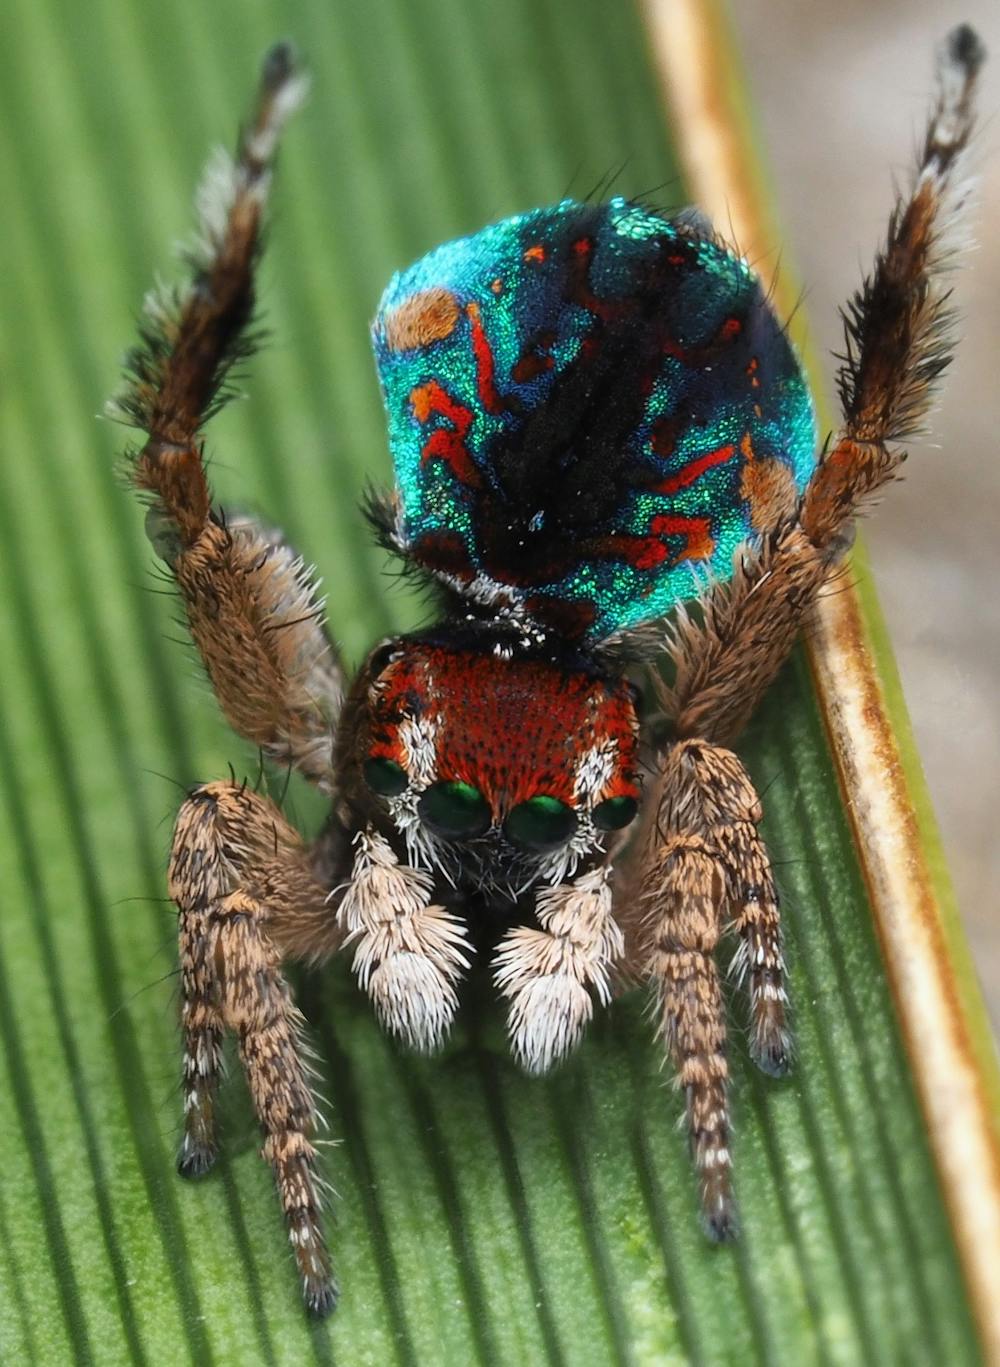 Surprise: Jumping Spiders Can See More Colors Than You Can